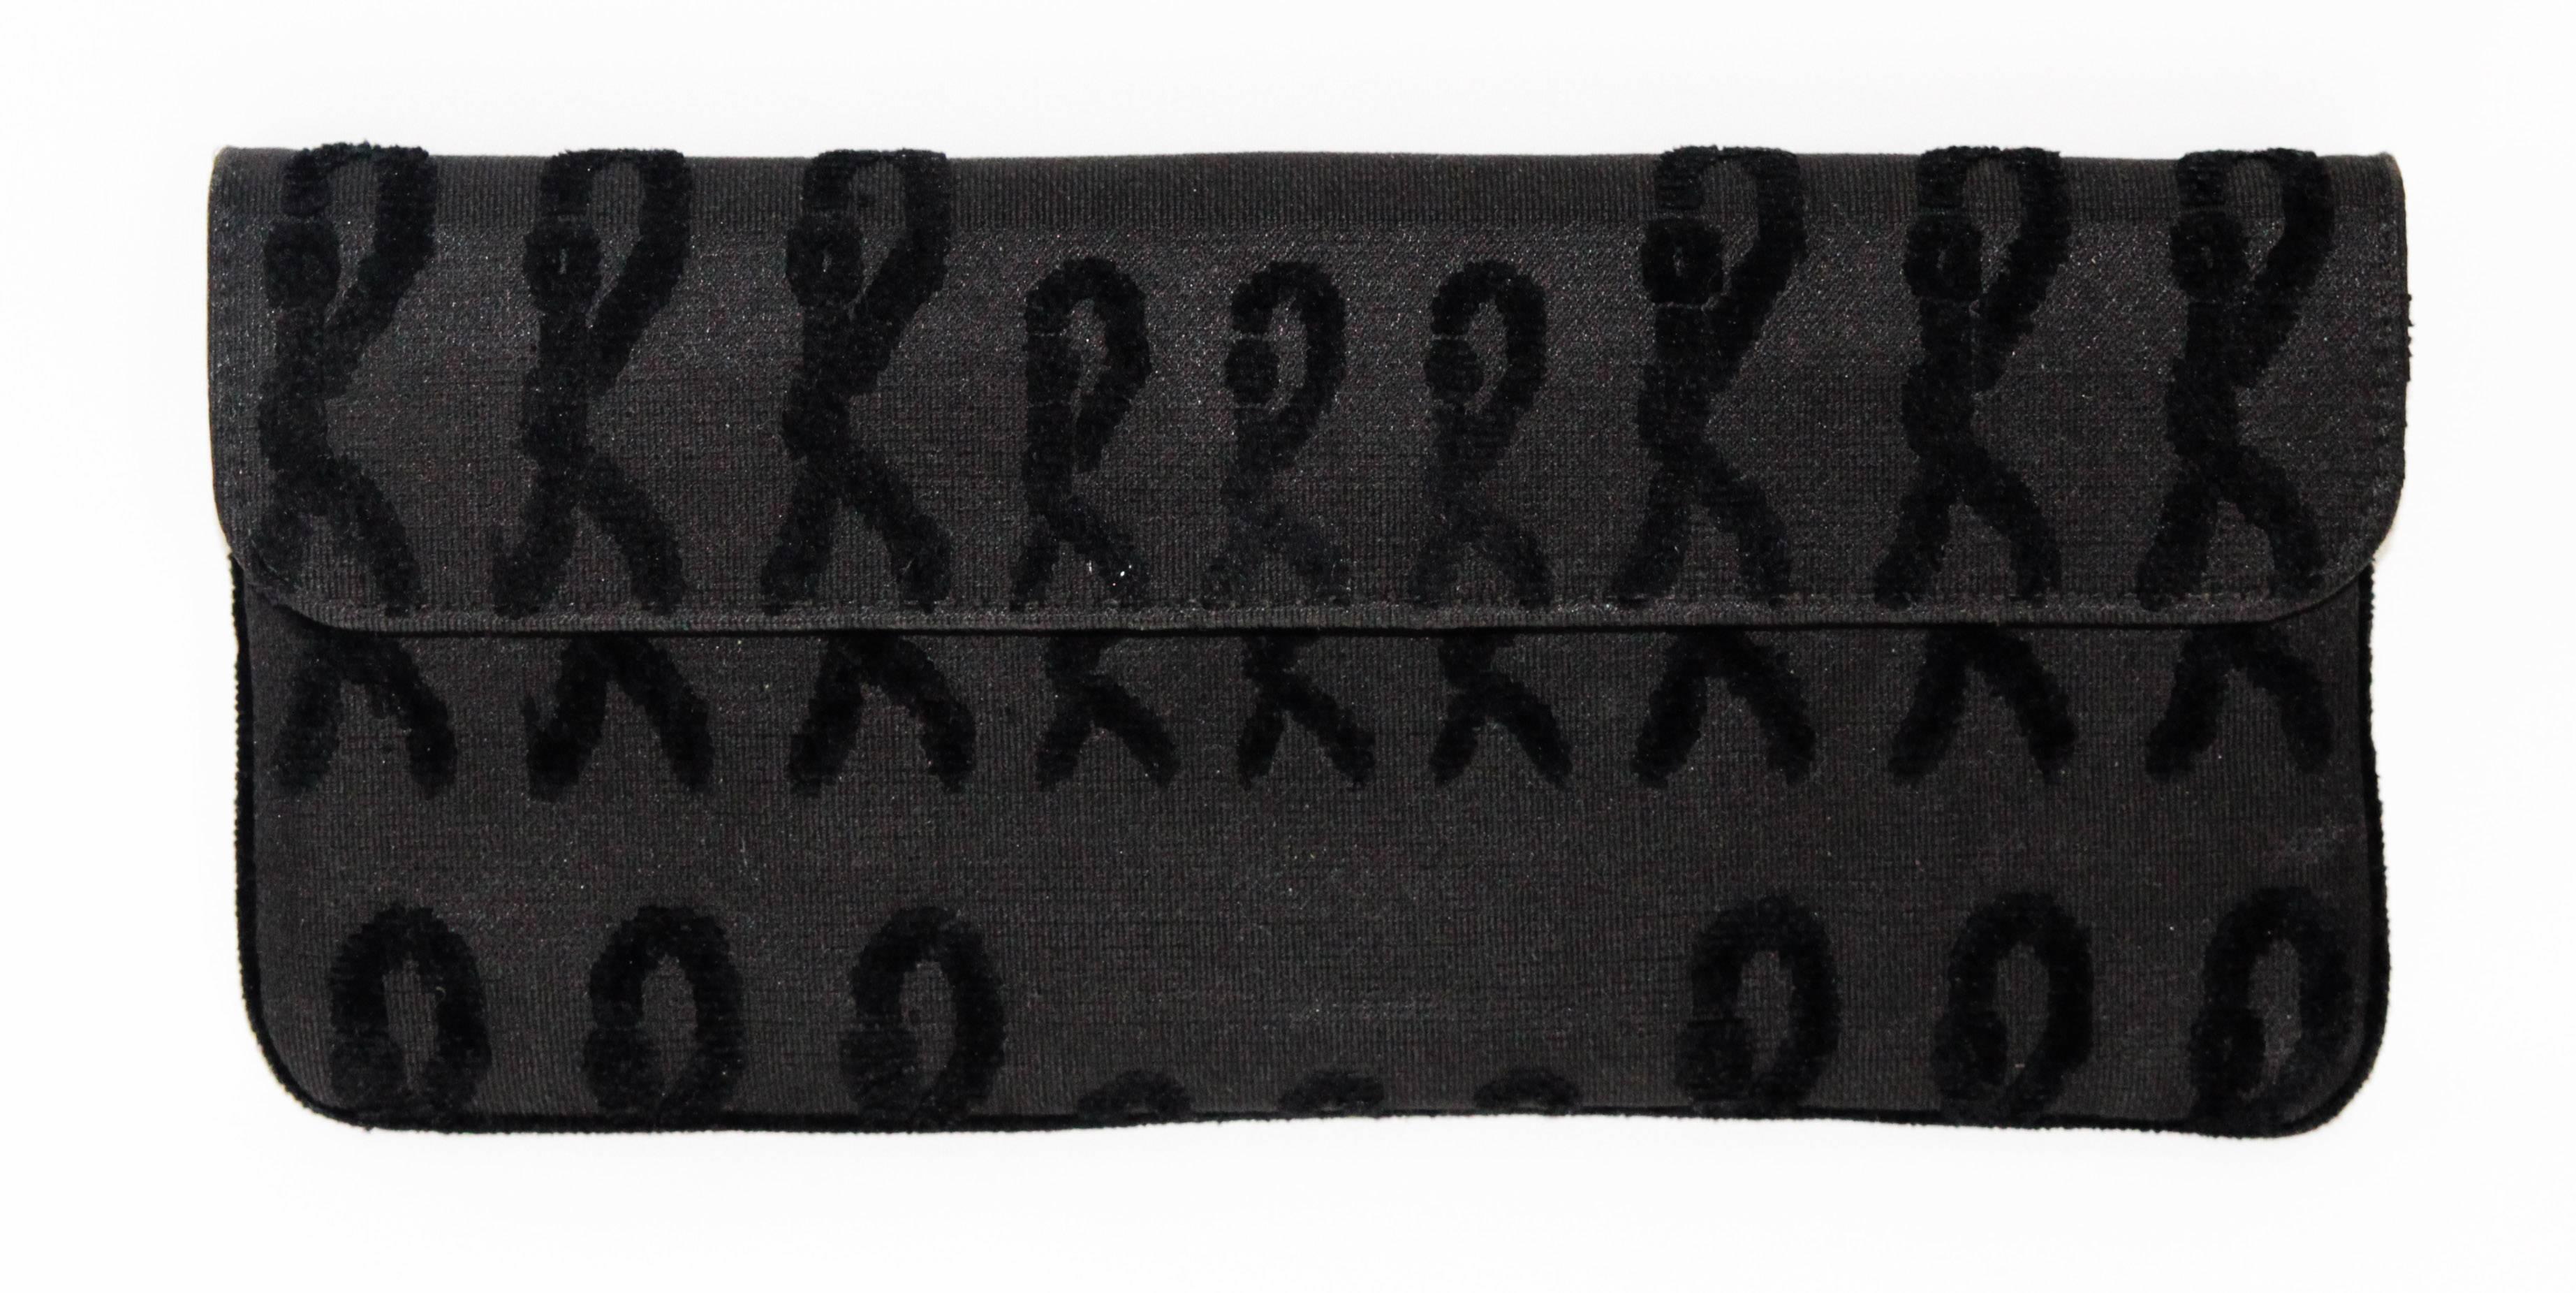 Stunning & collectable piece of Roberta di Camerino. Black velvet clutch/purse embellished by a double horses' handle on the back side. Black leather lining. c.1970. Excellent vintage condition. Read more about Roberta di Camerino on the blog. Size: